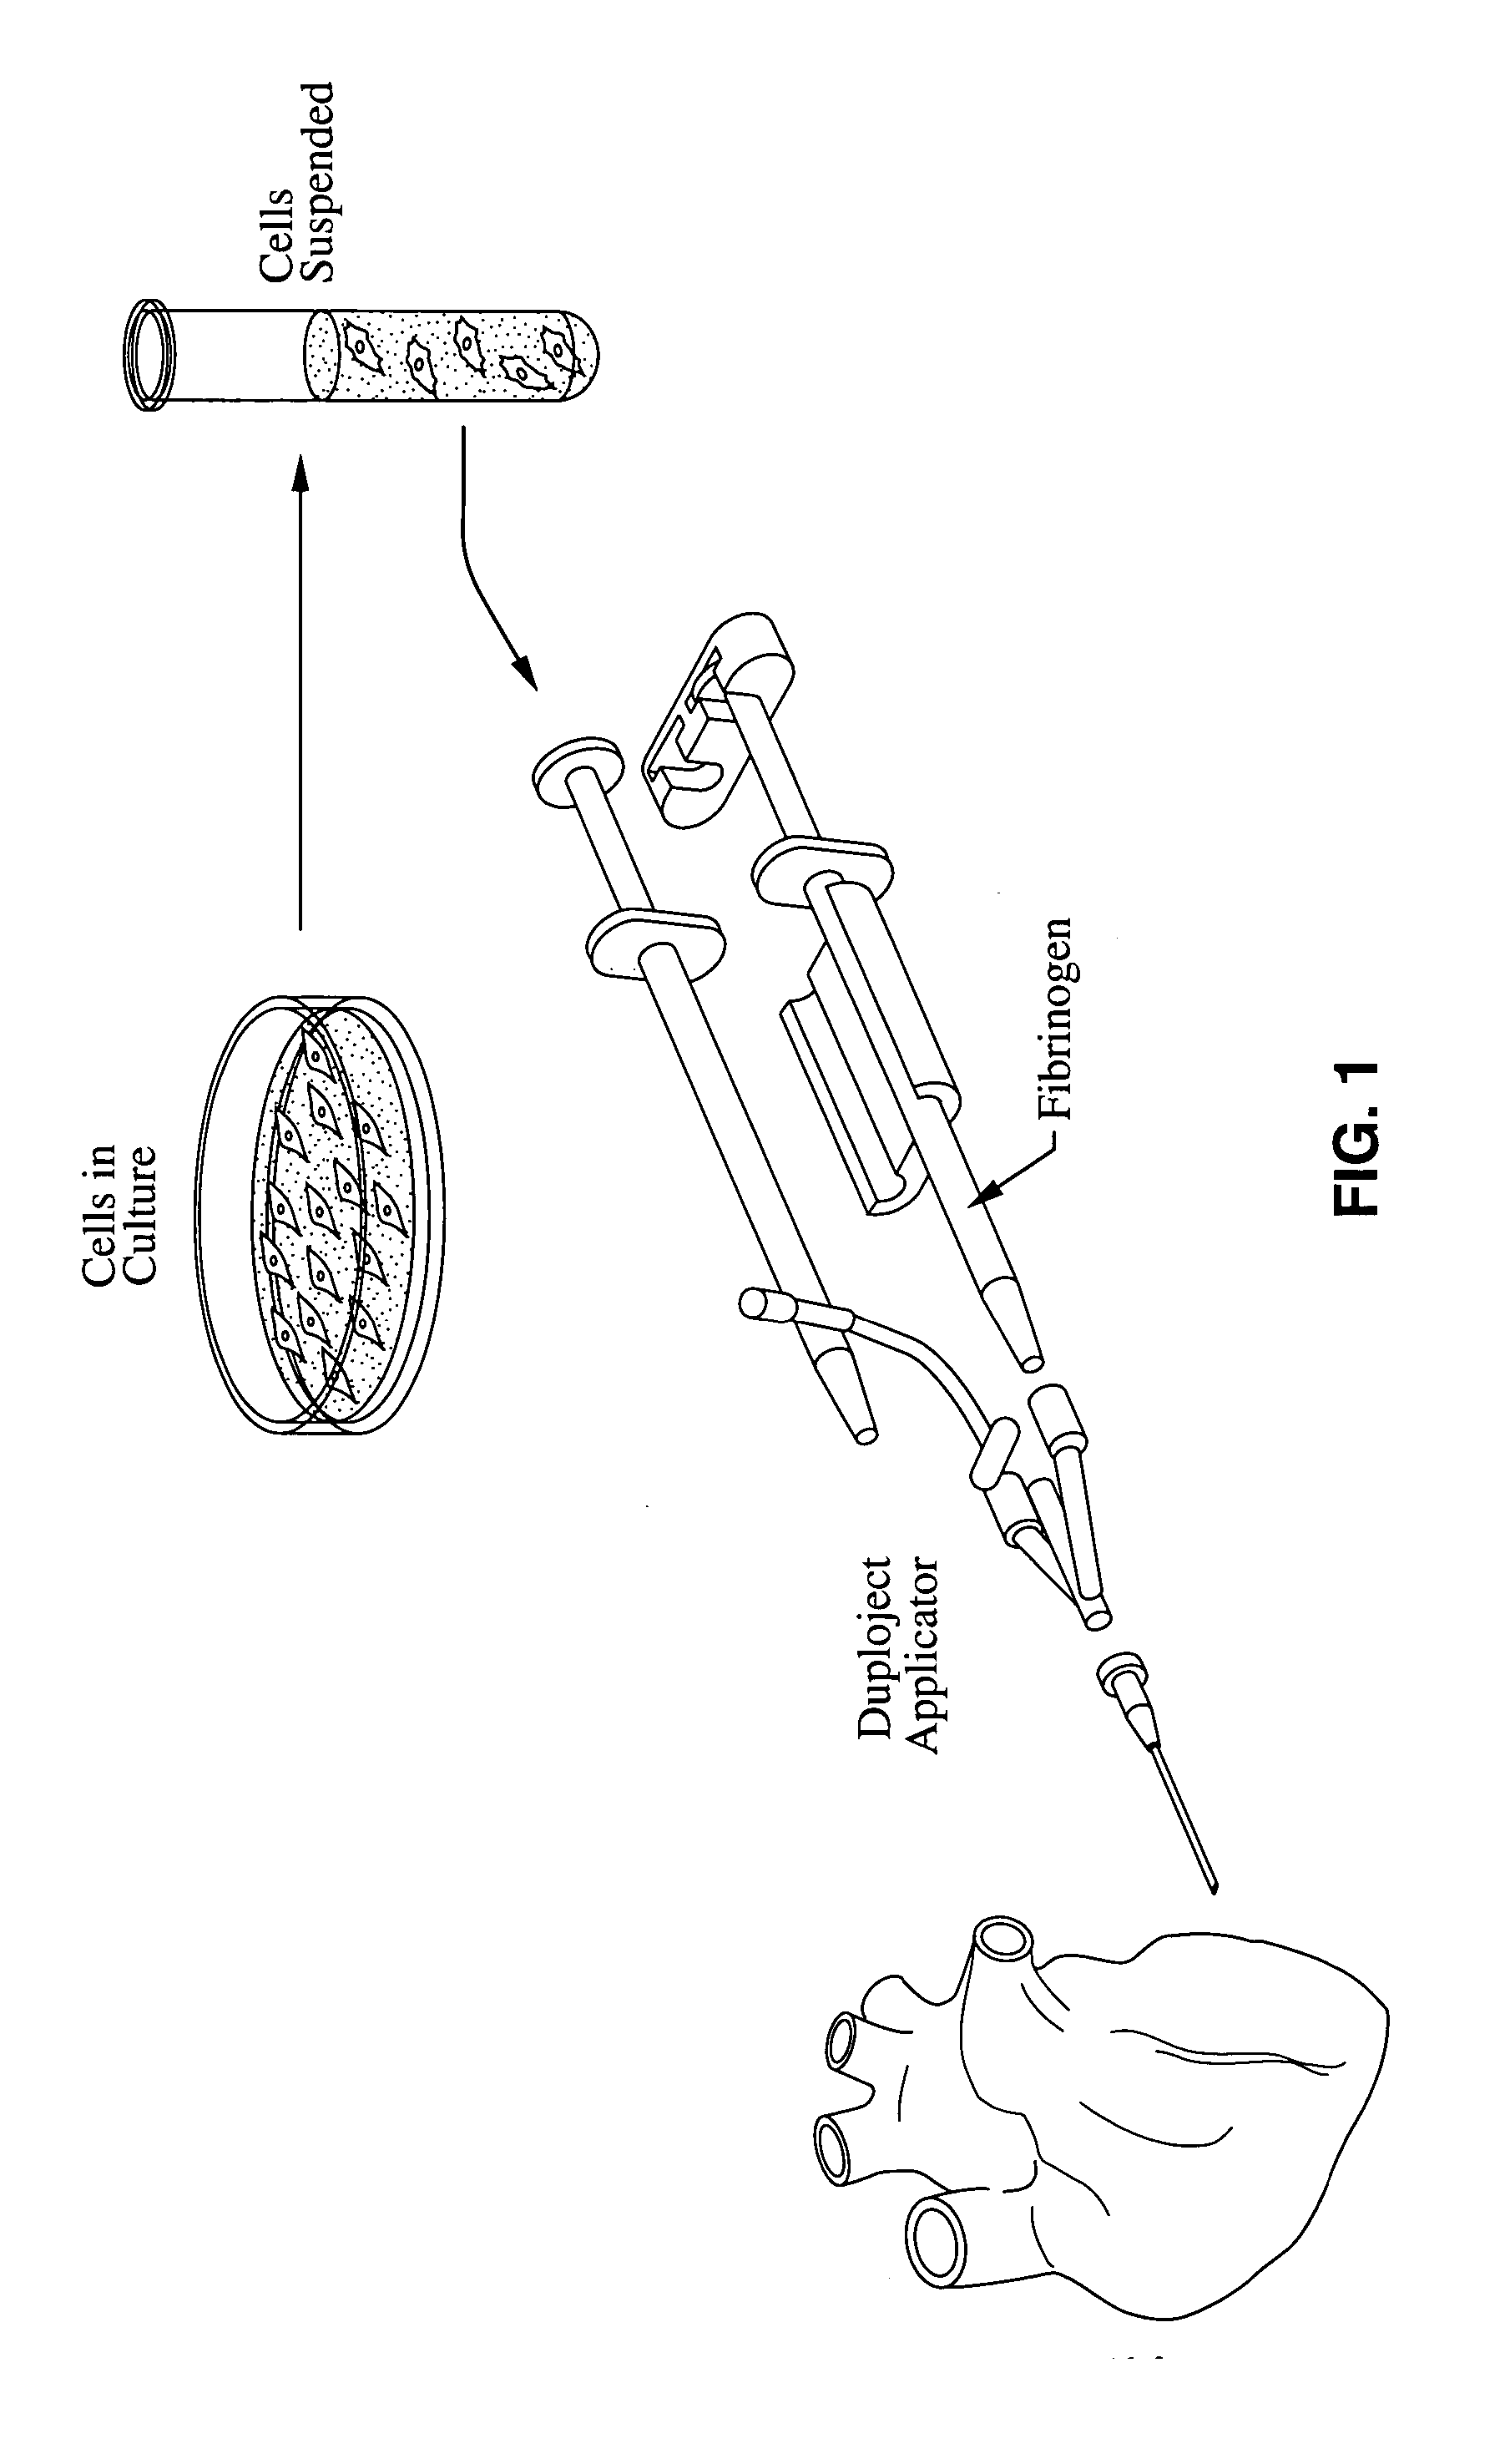 Material compositions and related systems and methods for treating cardiac conditions